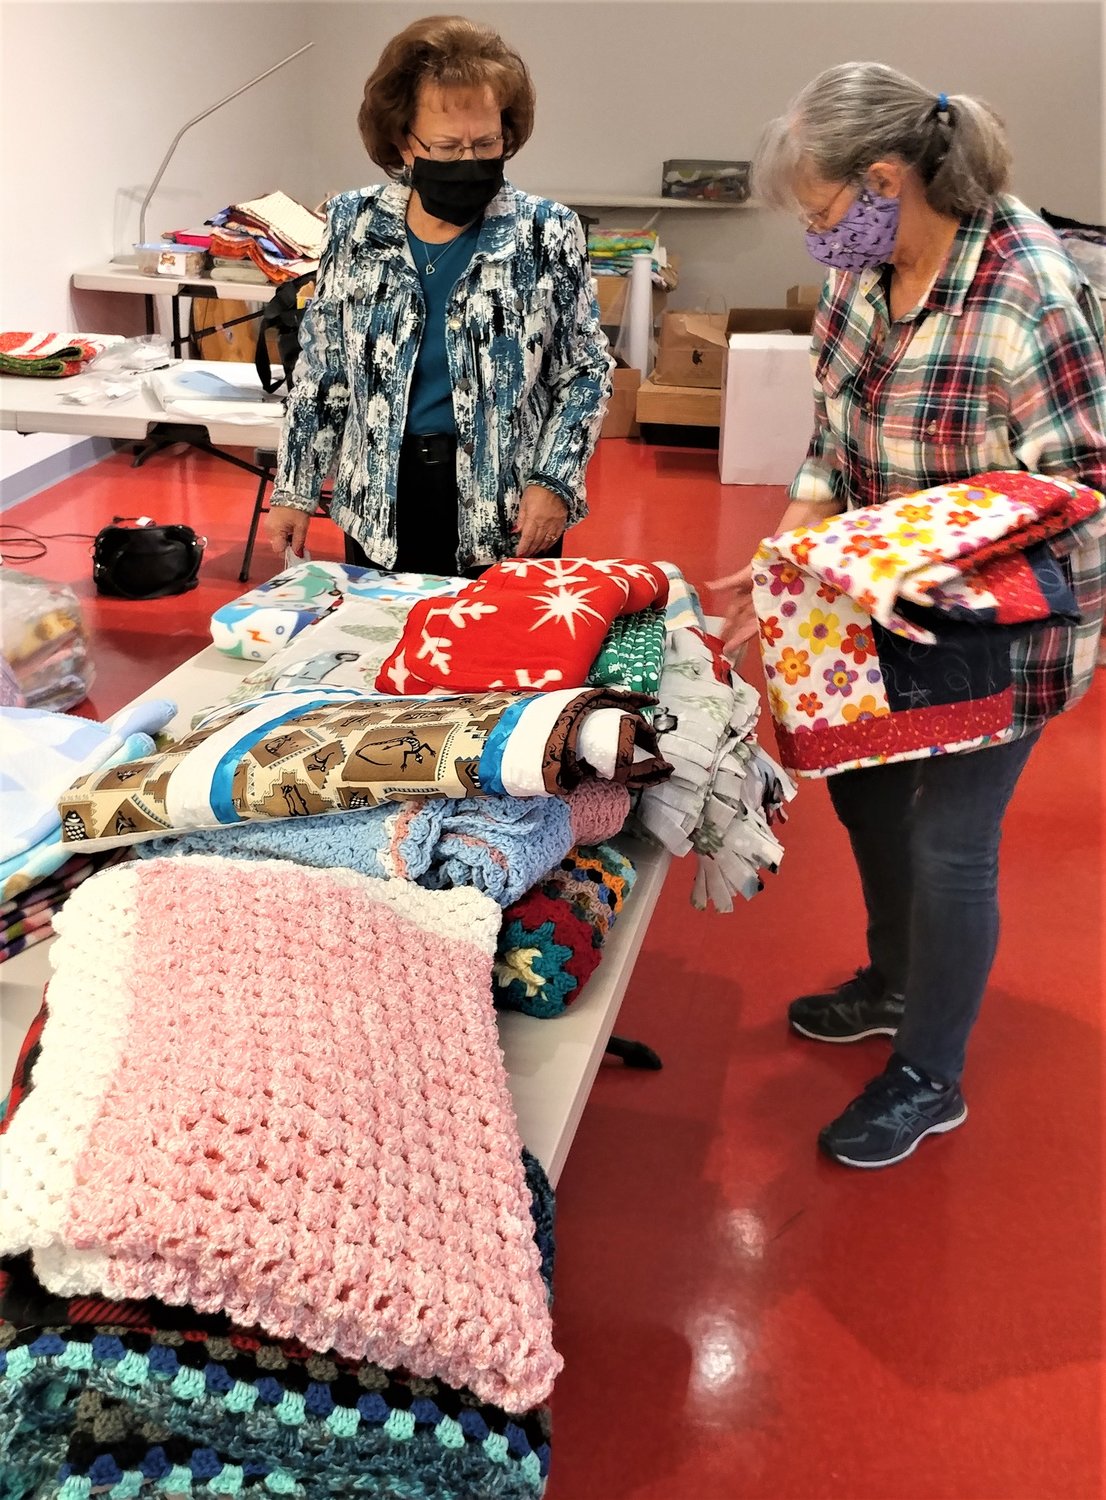 Project Linus Las Cruces chapter members Kathy Mitchell and Debby Schmidt folding, sorting and bagging quilts and blankets for delivery to children in need in Las Cruces and Deming.